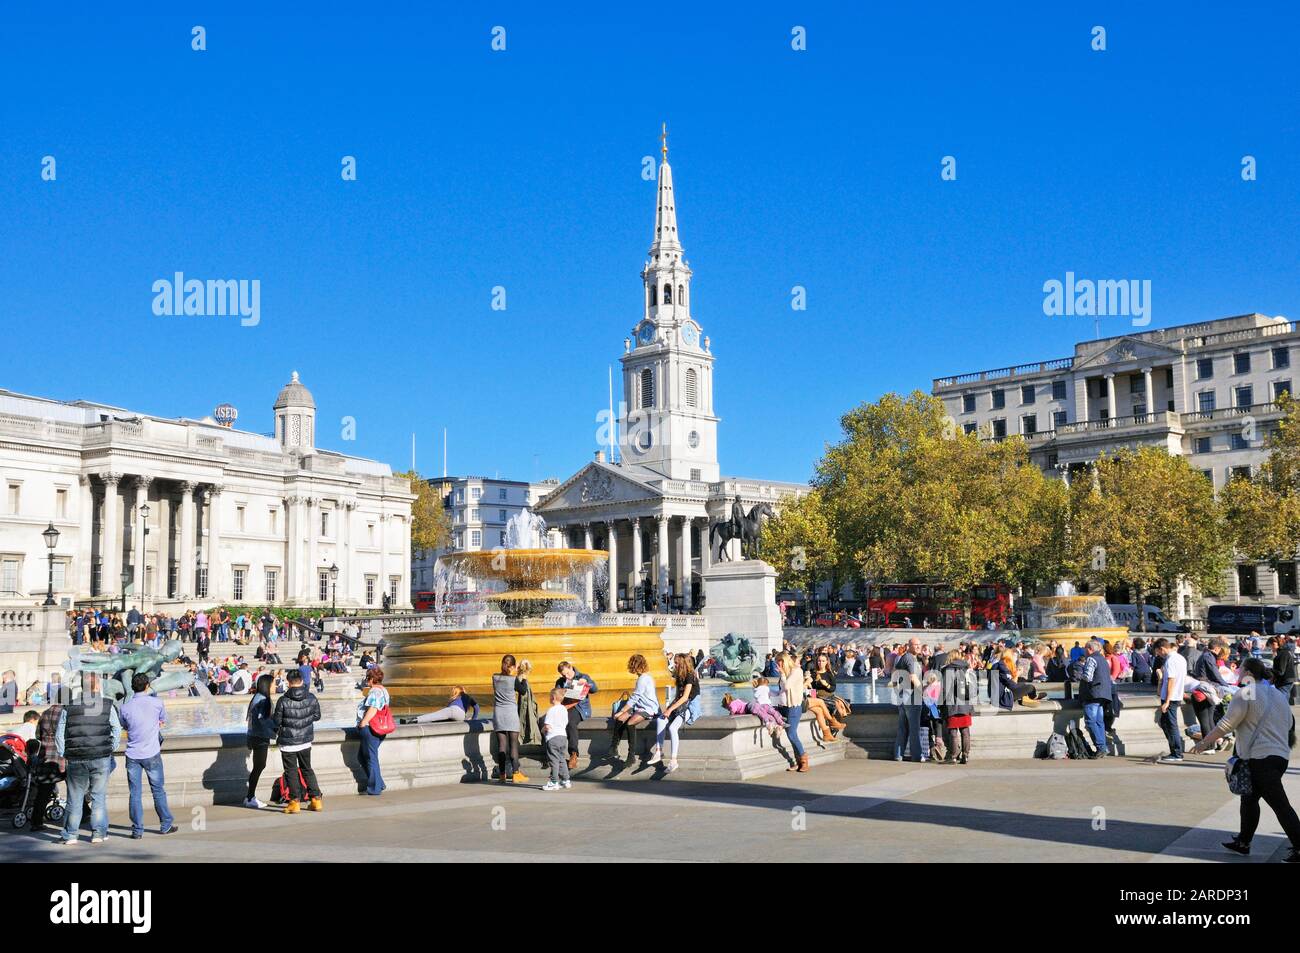 Tourists sitting around the fountains in a sunny Trafalgar Square with St Martin-in-the-Fields church in the background, London, England, UK Stock Photo